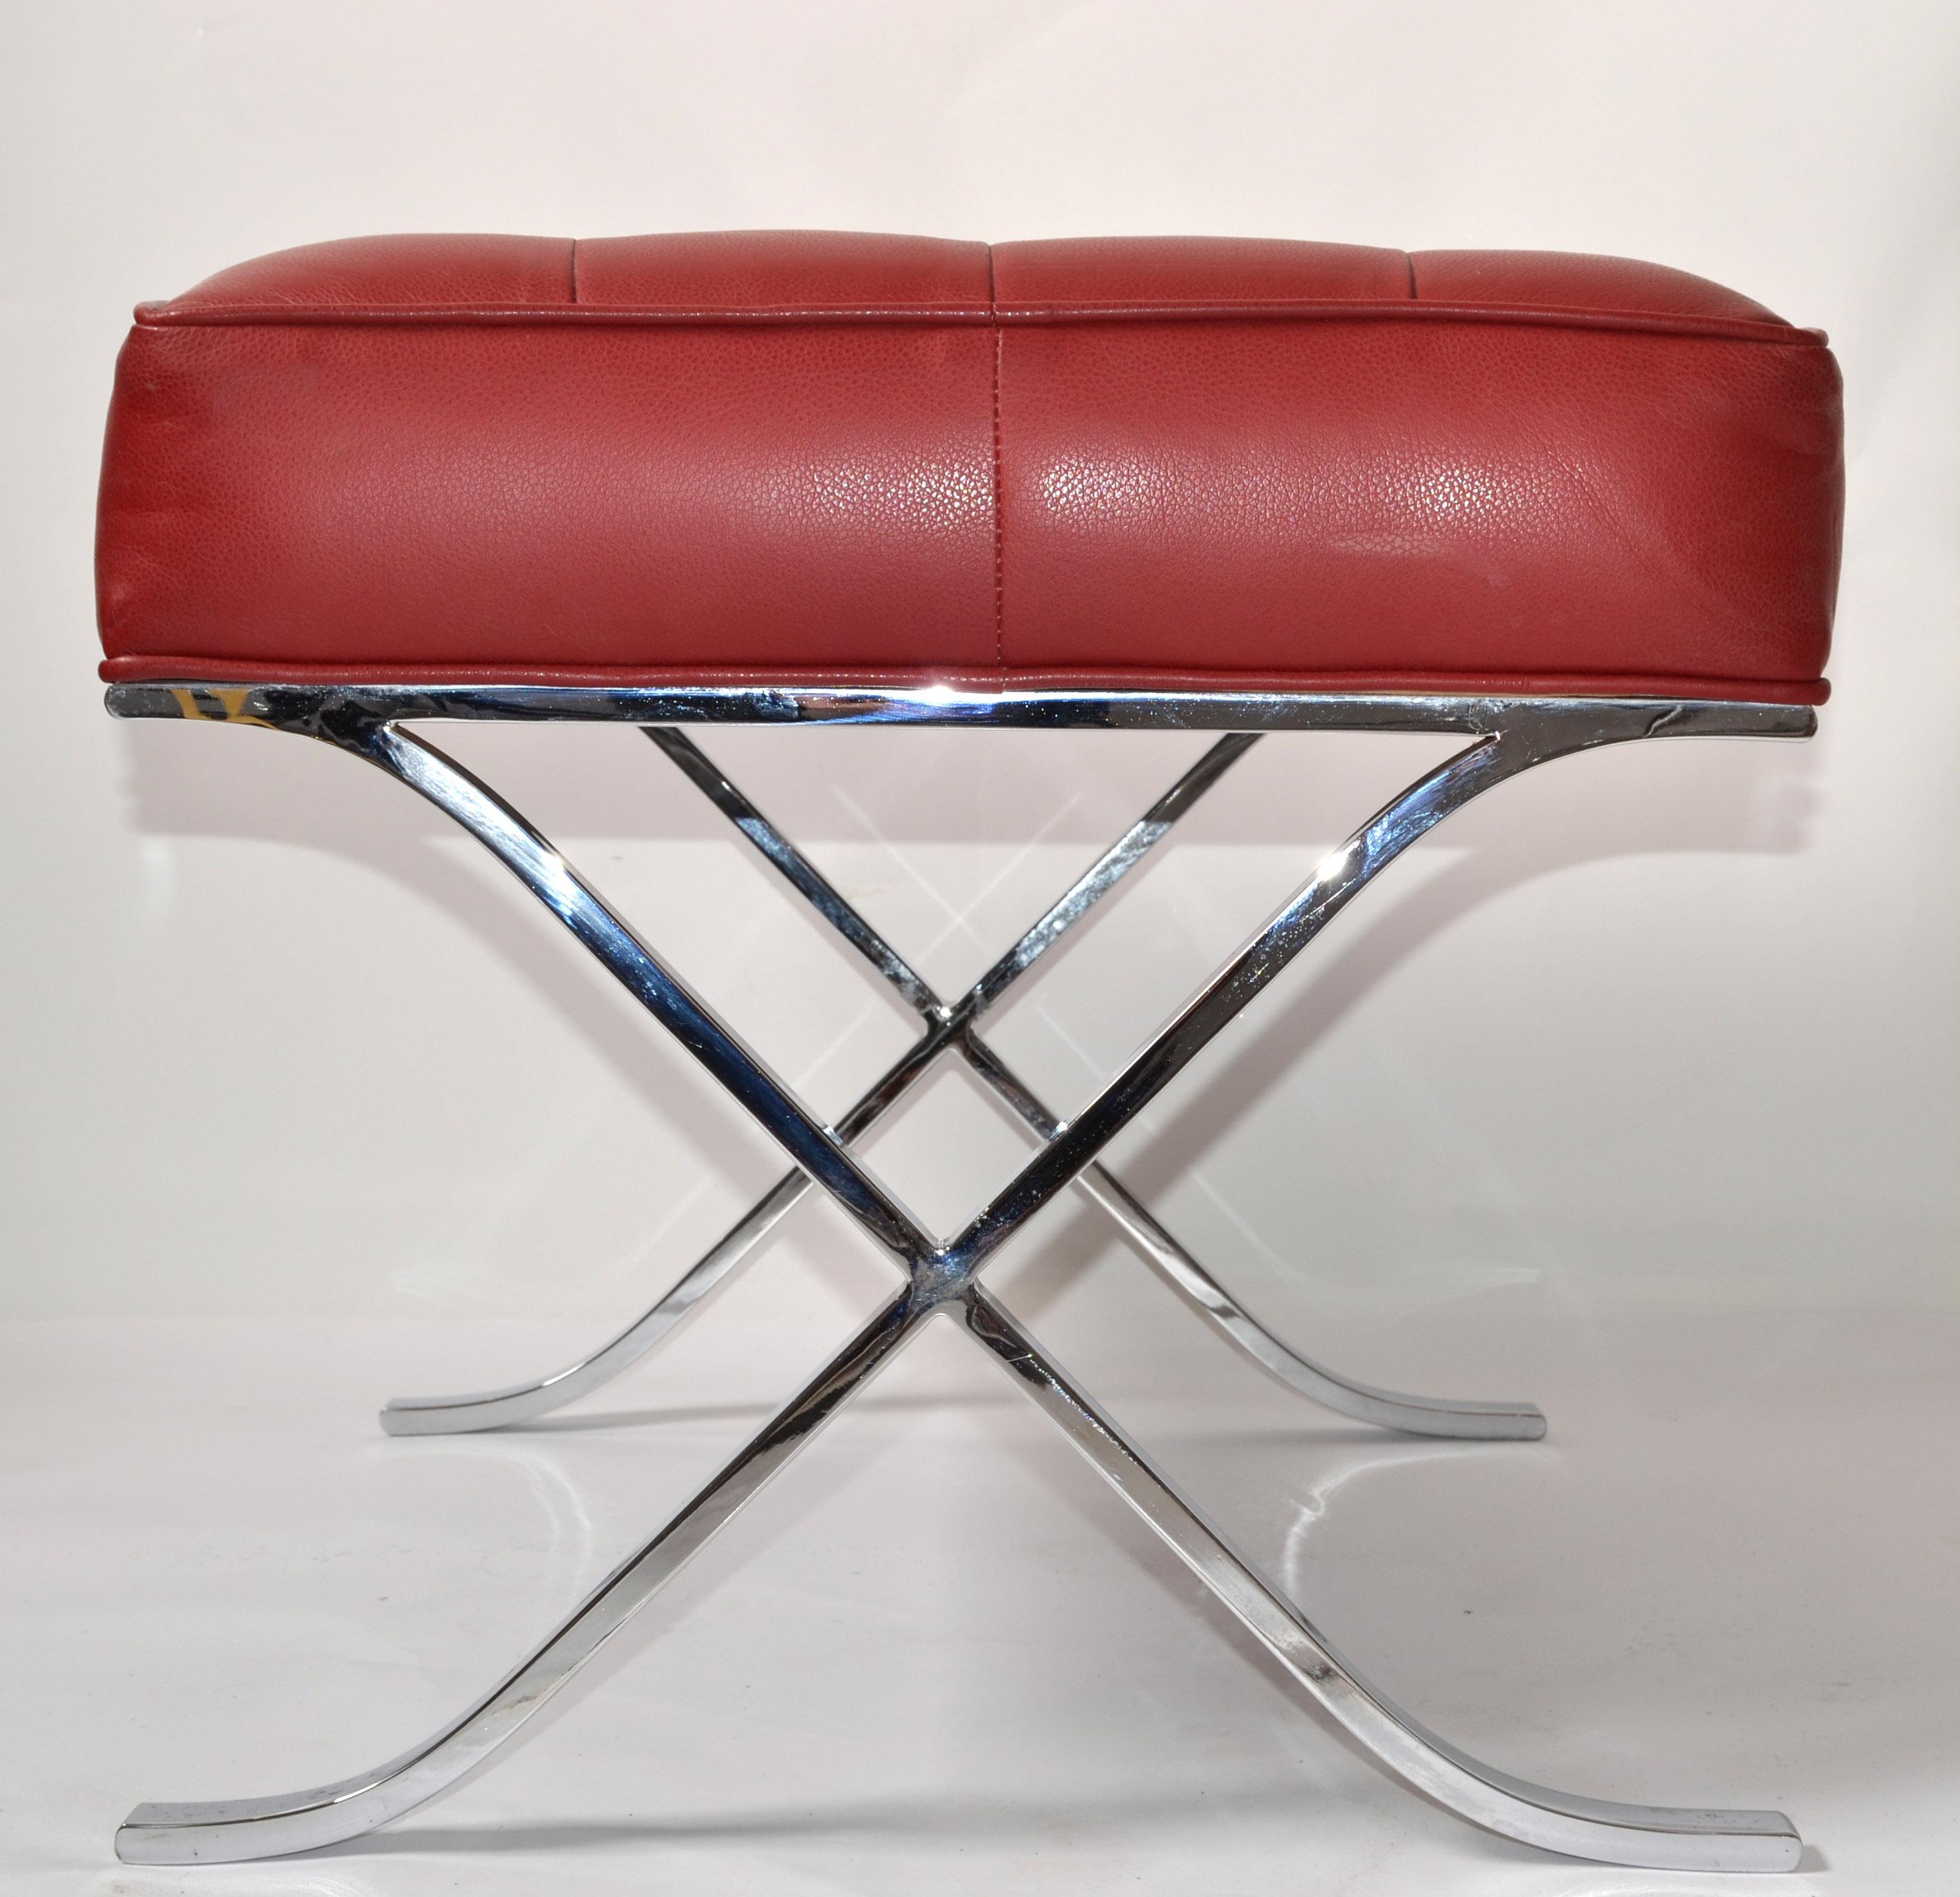 Mid-Century Modern Mies van der Rohe attributed steel X base Barcelona style ottoman in tufted rust red vinyl upholstery.
This Footstool is almost like the authentic Barcelona Series Ottoman which were original produced by Knoll.
The dark red